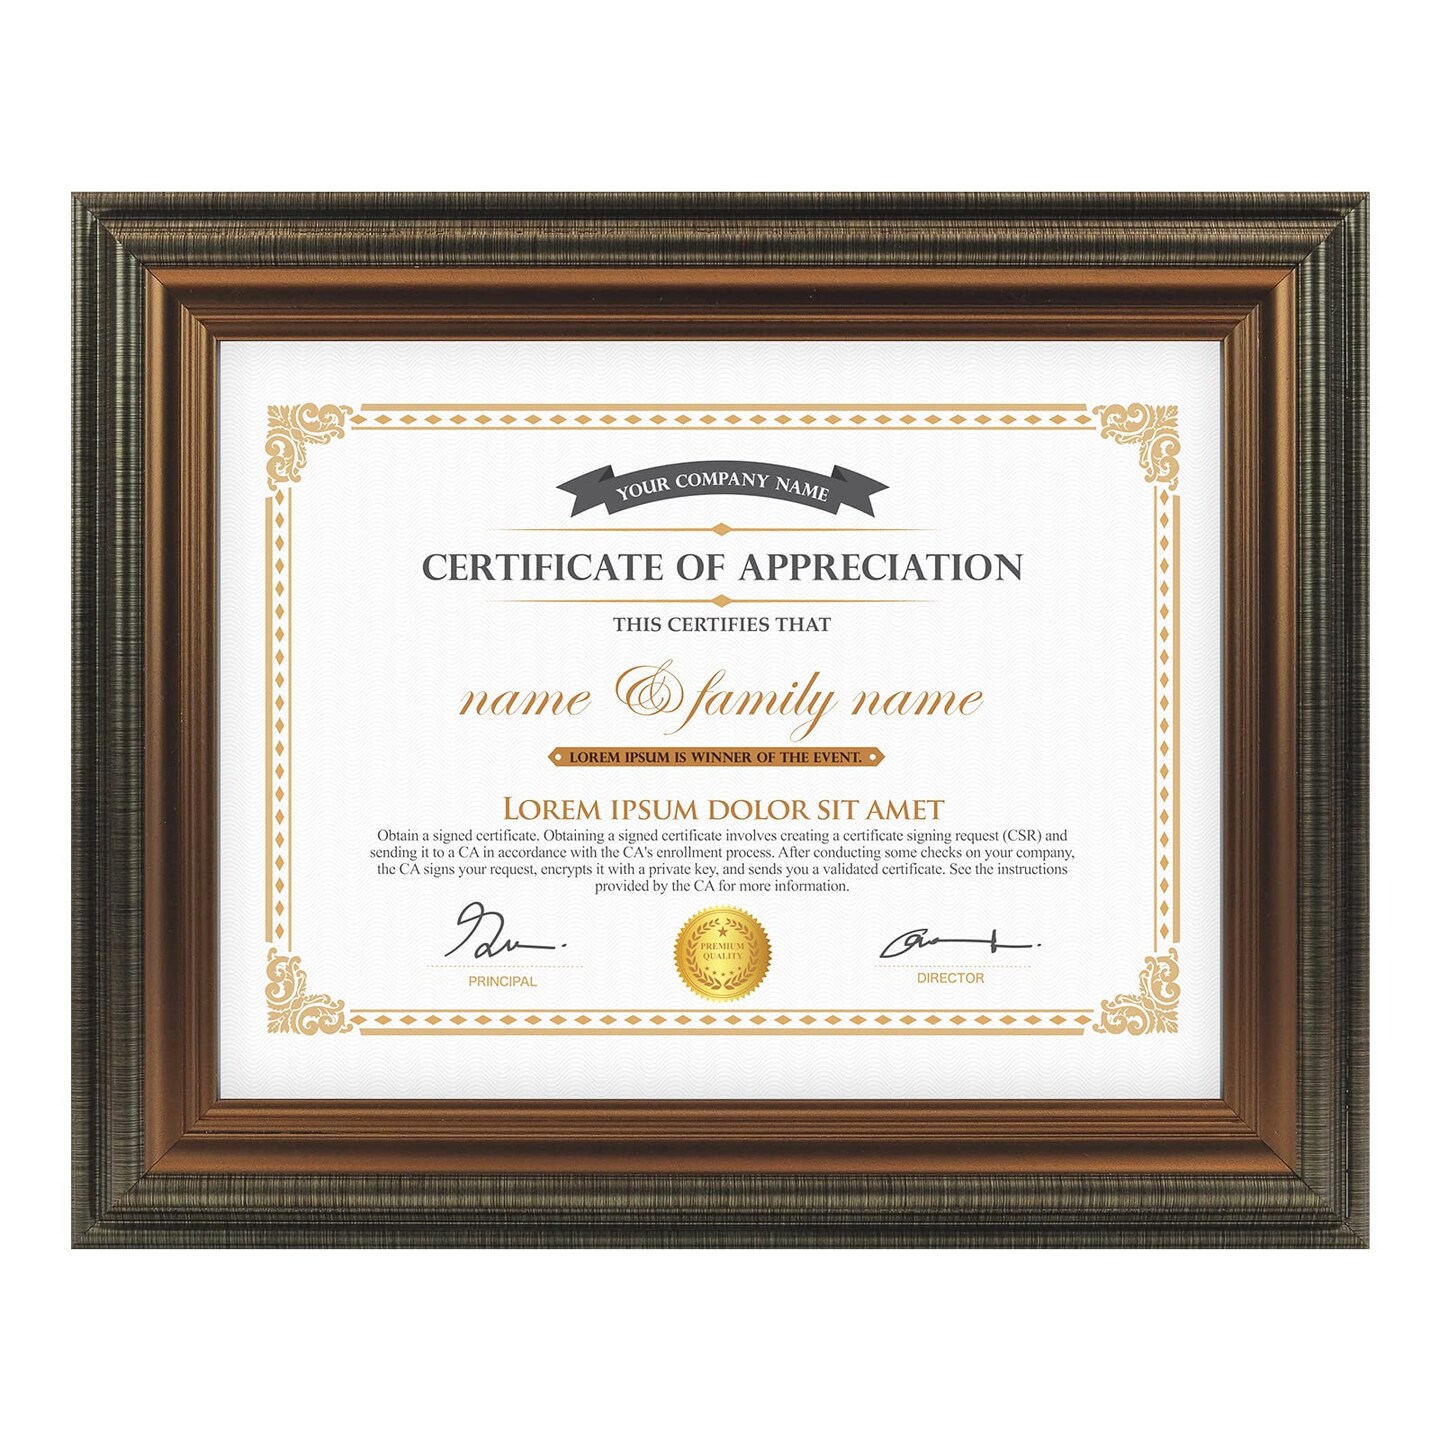 XUANLUO 8.5x11 Graduation Frames Certificate Document Frame with Tempered Glass Wood Grain Color Diploma Frames for Wall and Tabletop Brown 1 Pack